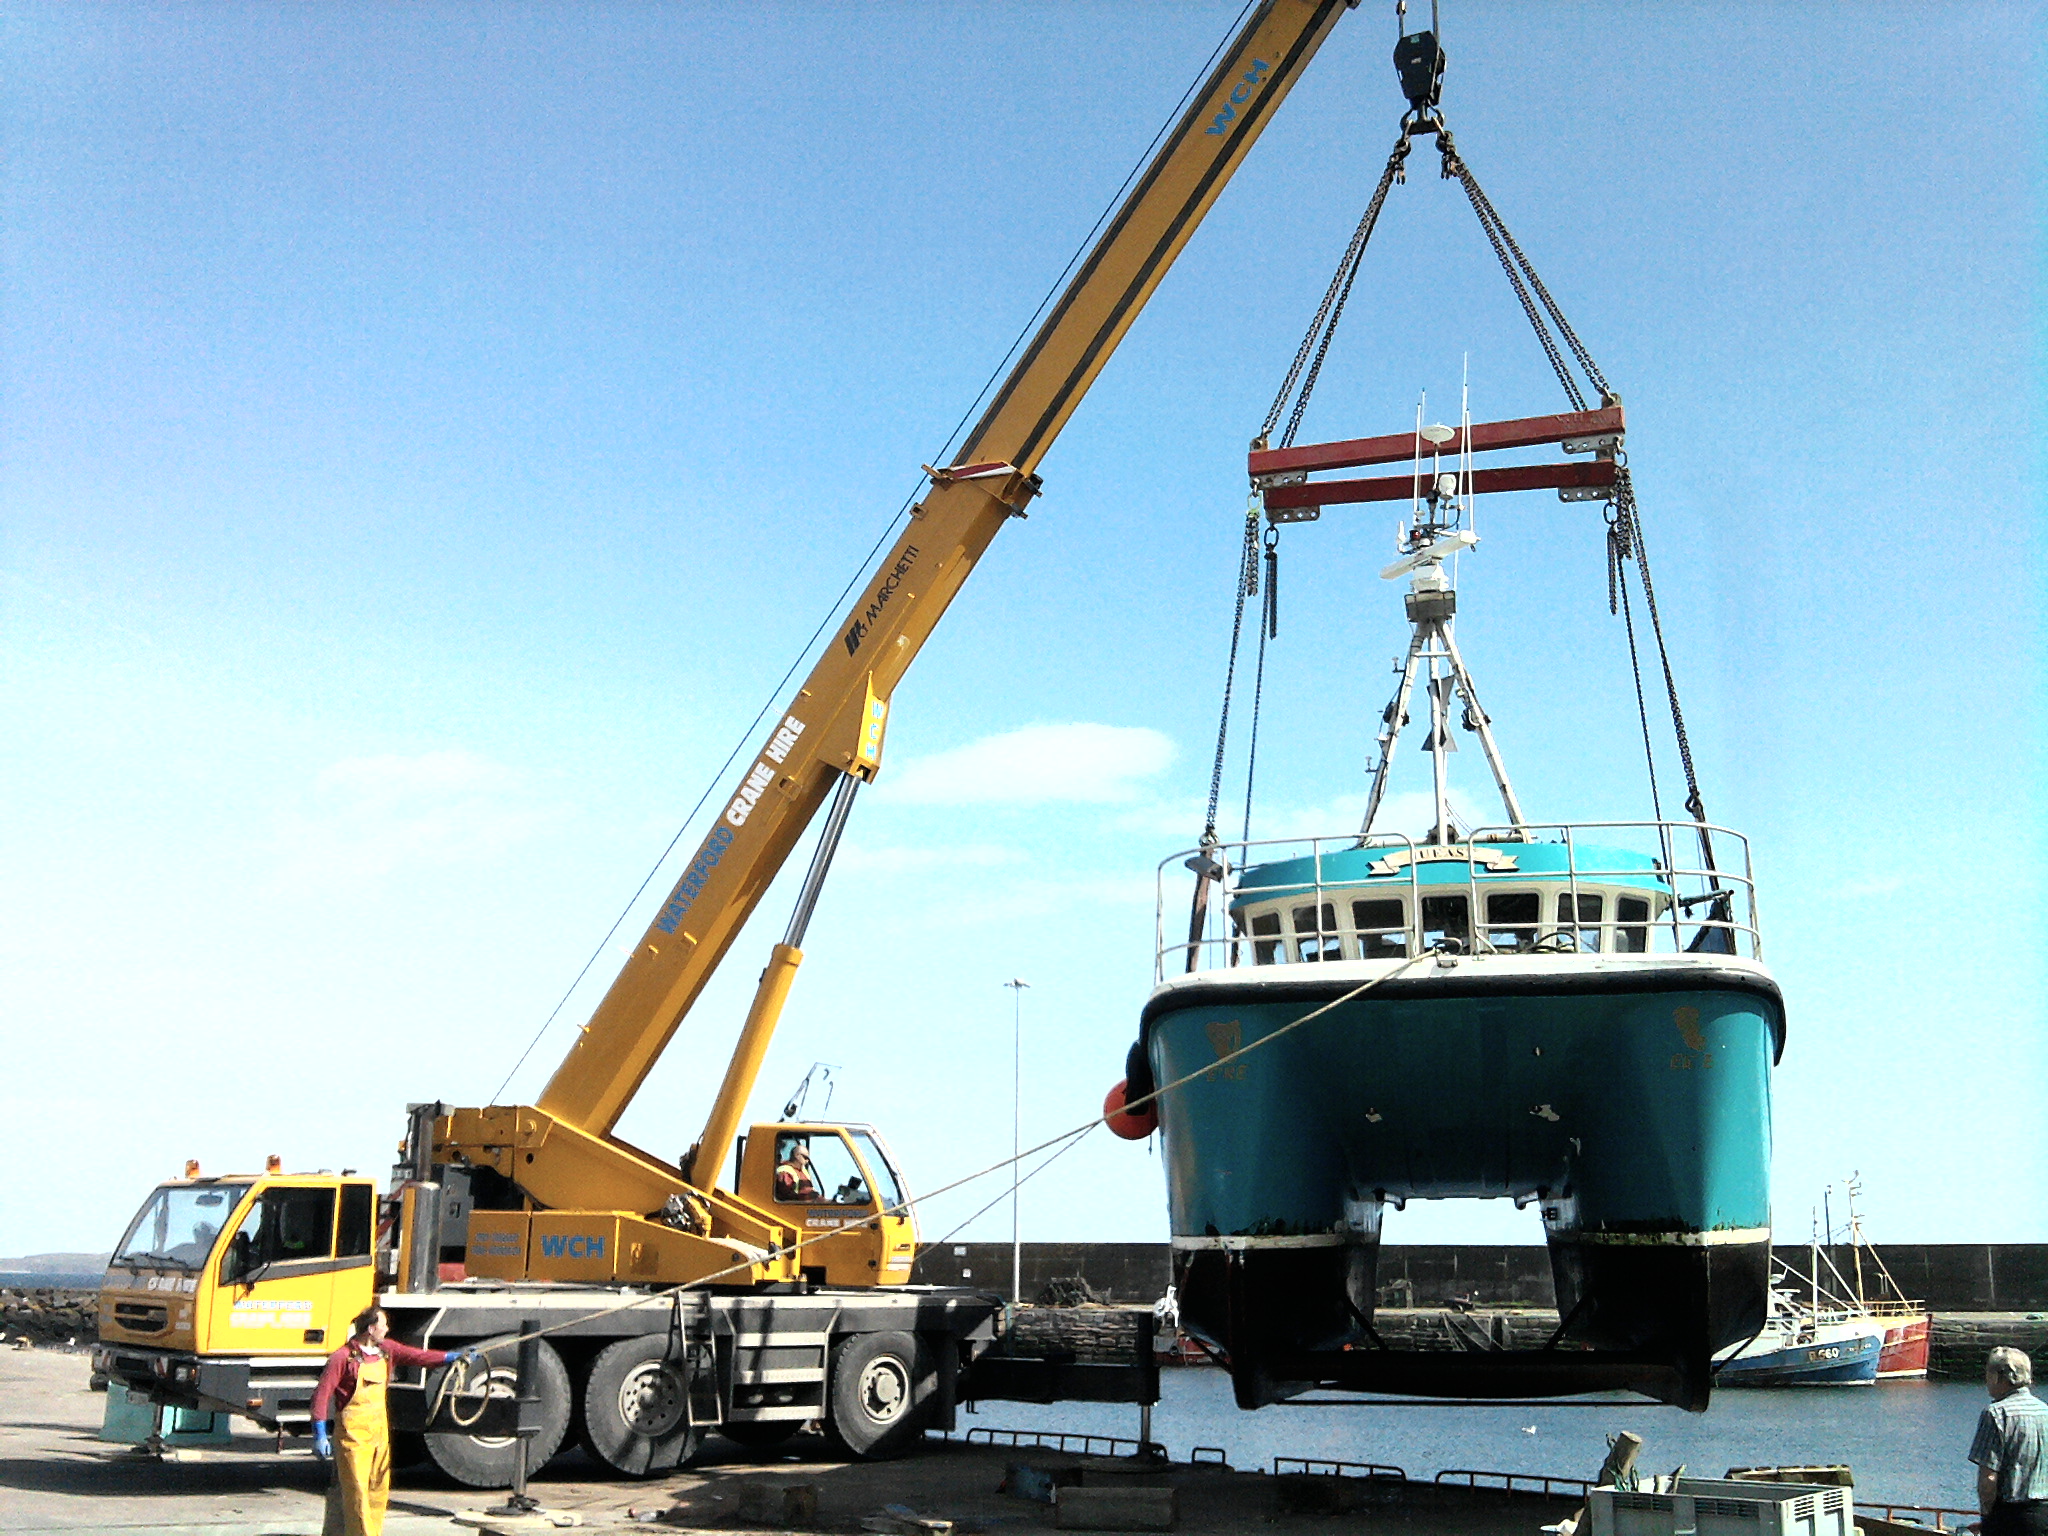 Lifting a 20t catamaran from the water with use of heavy lifting beams in Dunmore East, Co.Waterford